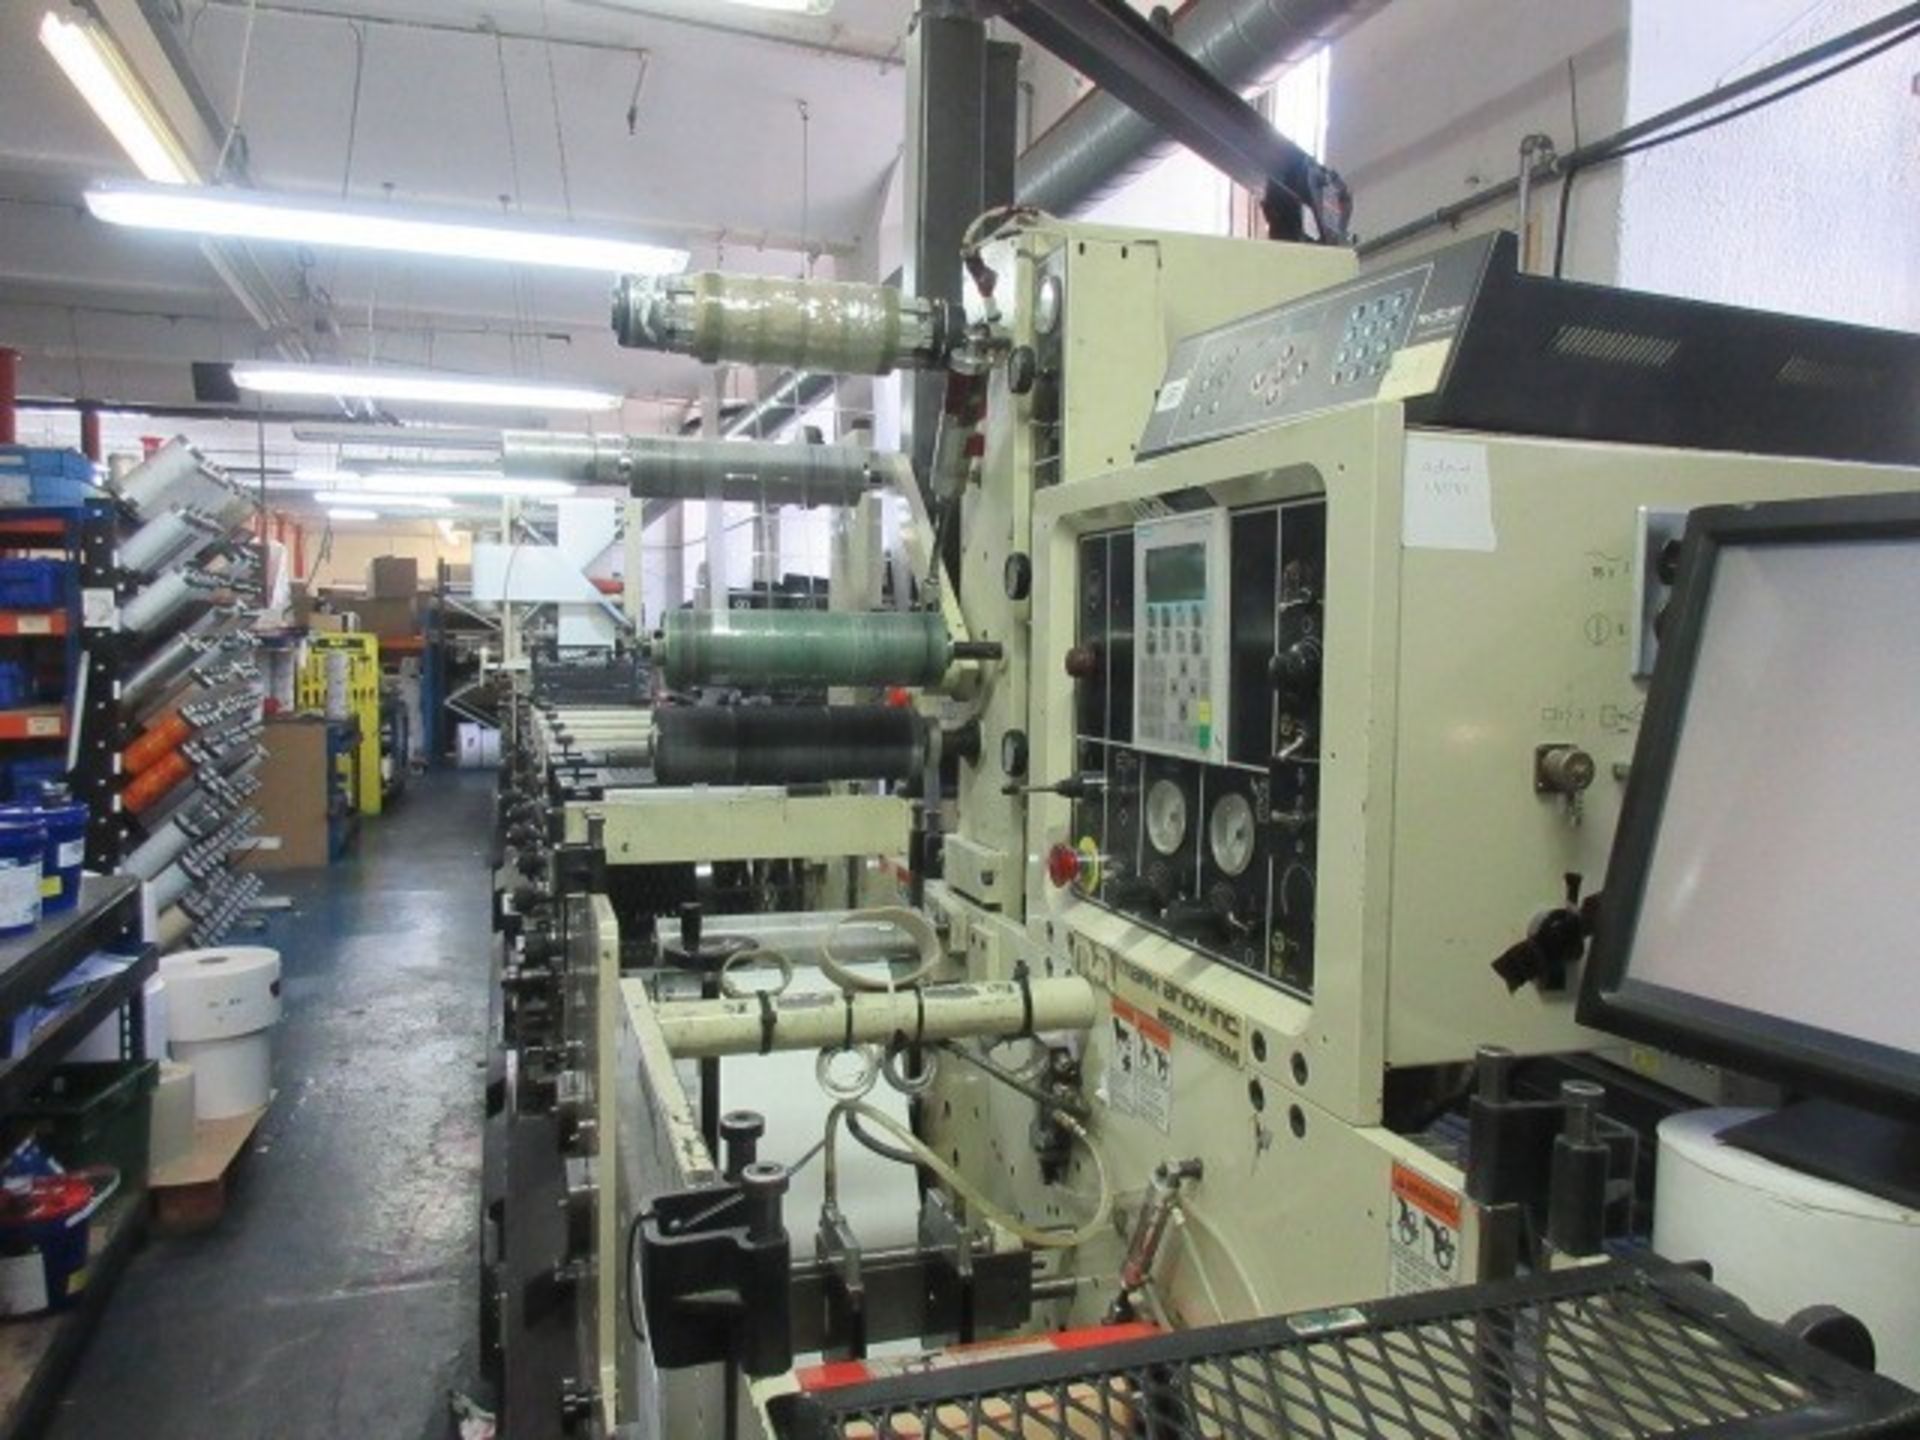 Mark Andy 2200-10F 10” 8 colour flexographic label printing press. Serial no: 1260086 (2002) - Image 227 of 383